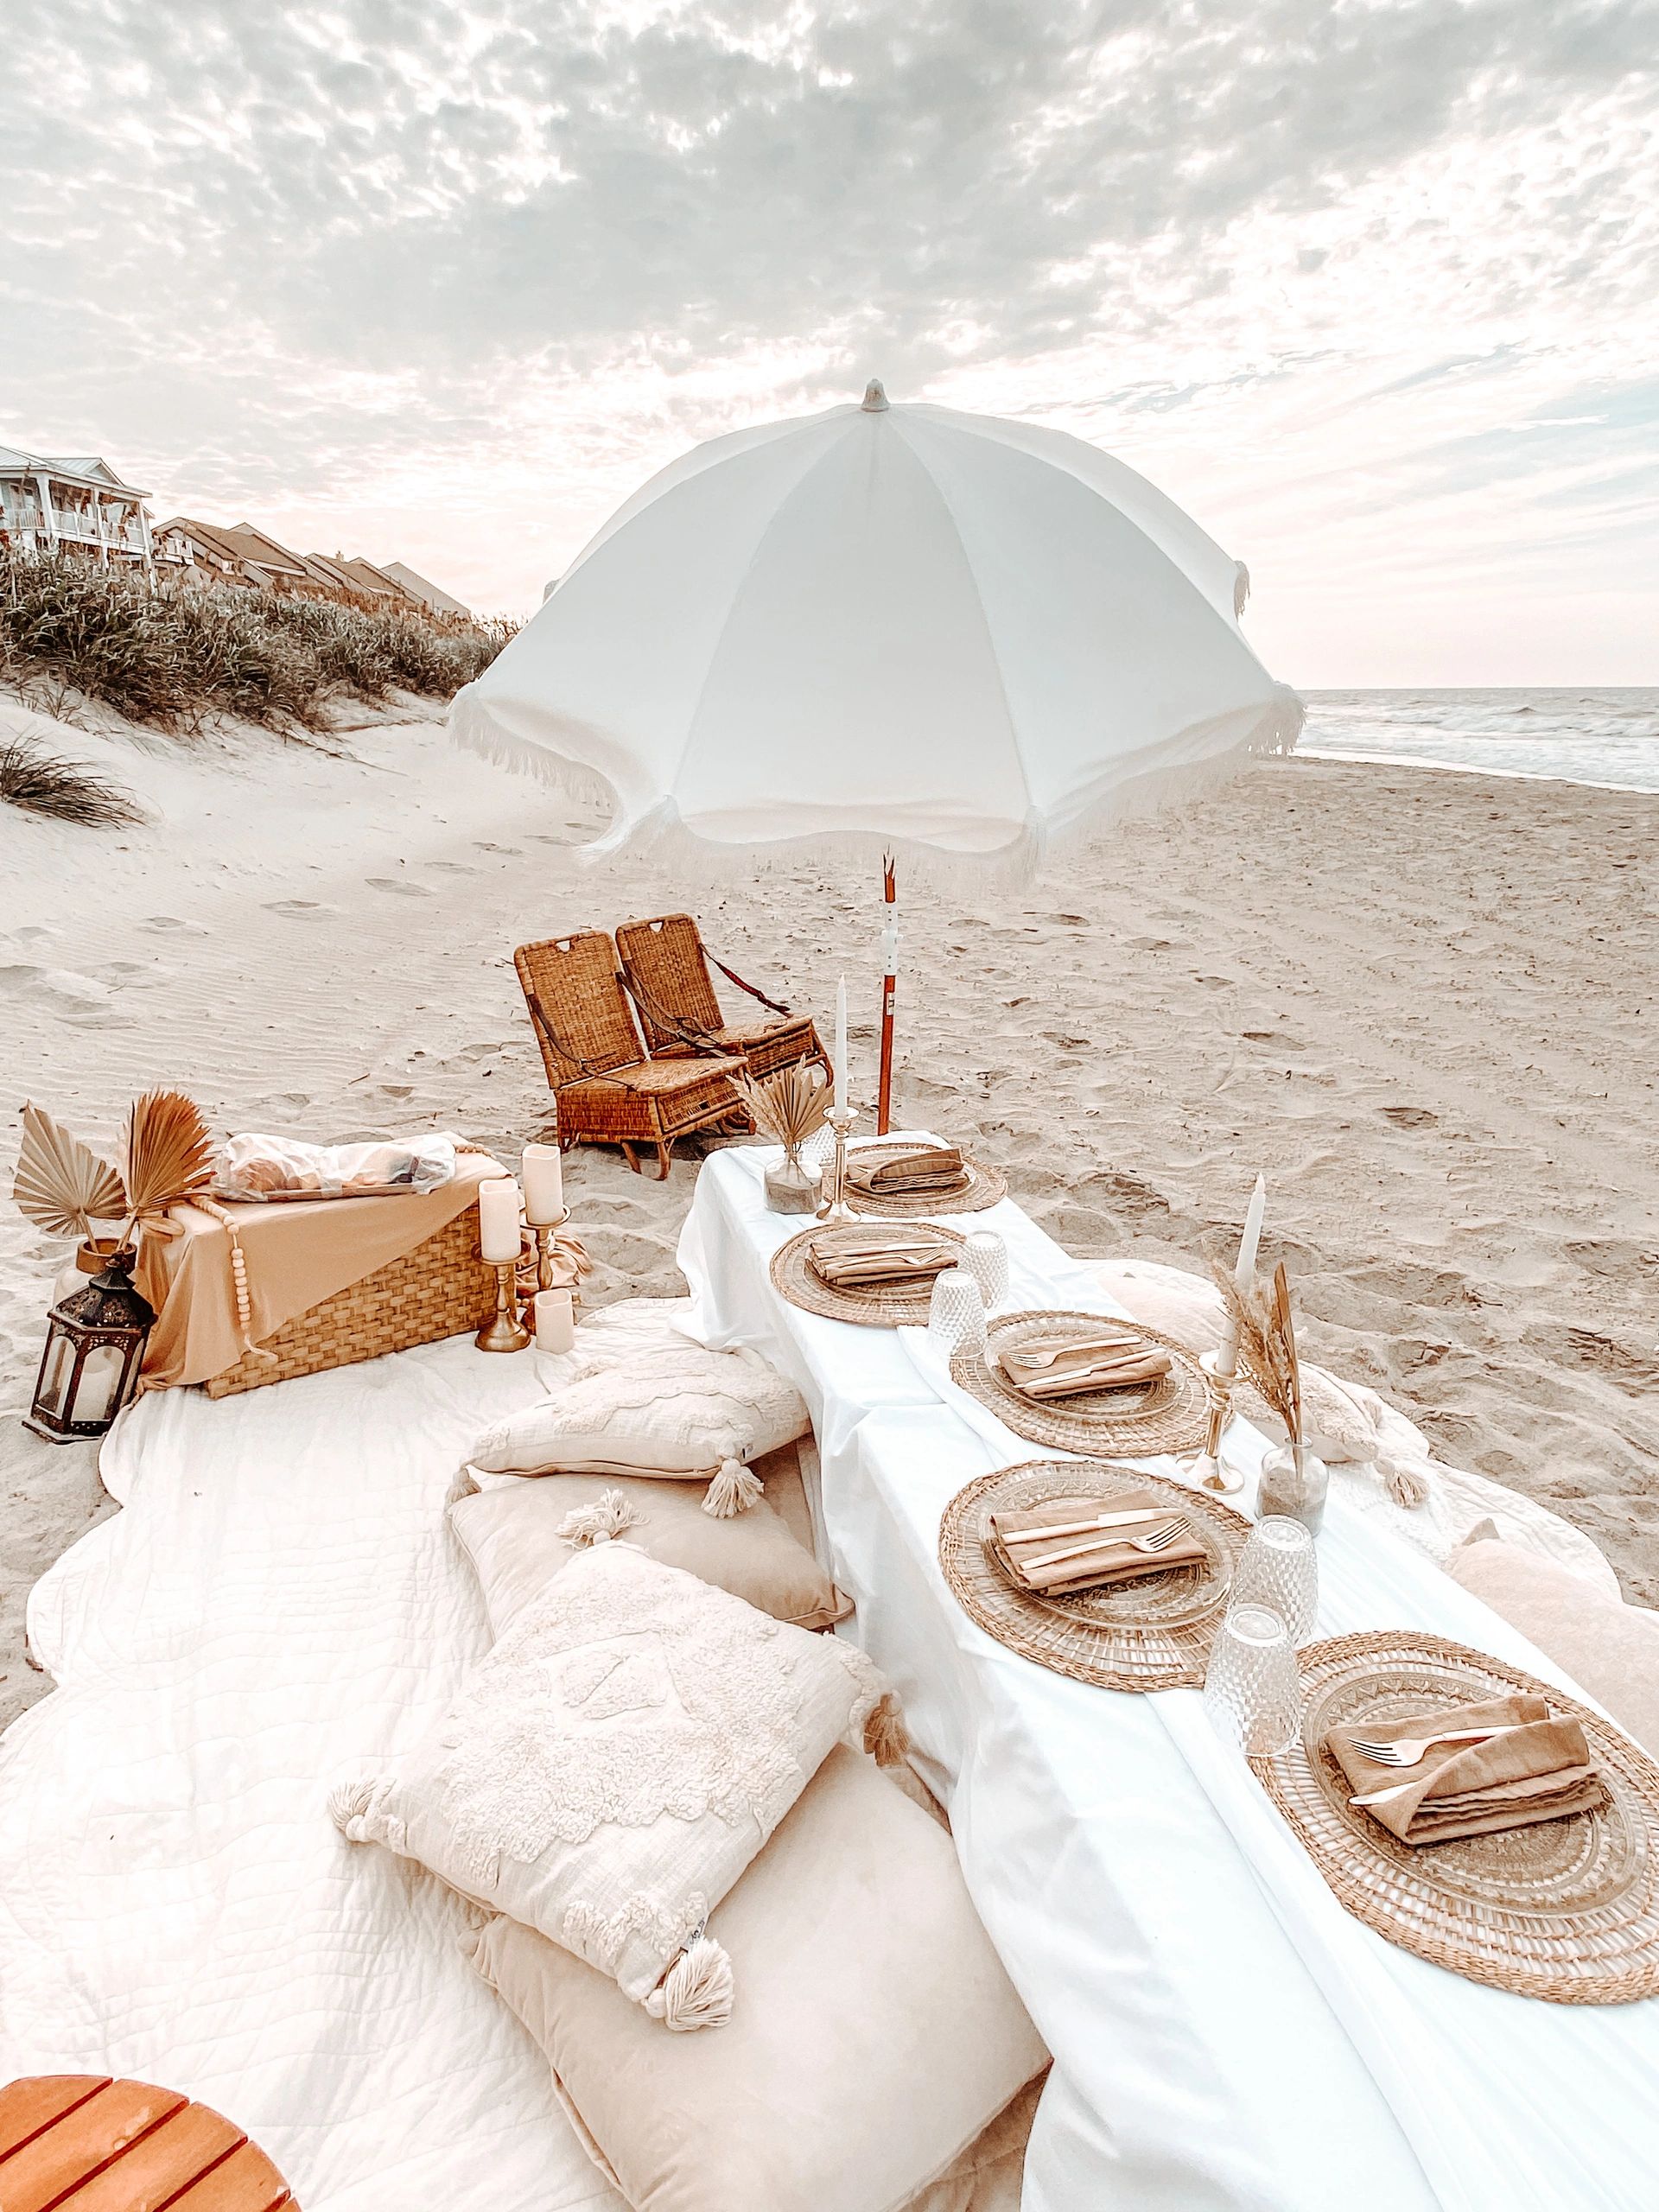 OBX Picnic Co. - Bachelorette party goals💫 #obxpicnicco . . . #obxpicnic  #luxurypicnic #popuppicnic #picnicsetup #bacheloretteweekend  #bacheloretteparty #eventplanning #eventdesign #partygoals #outerbanks  #northcarolina #vacation #getaway